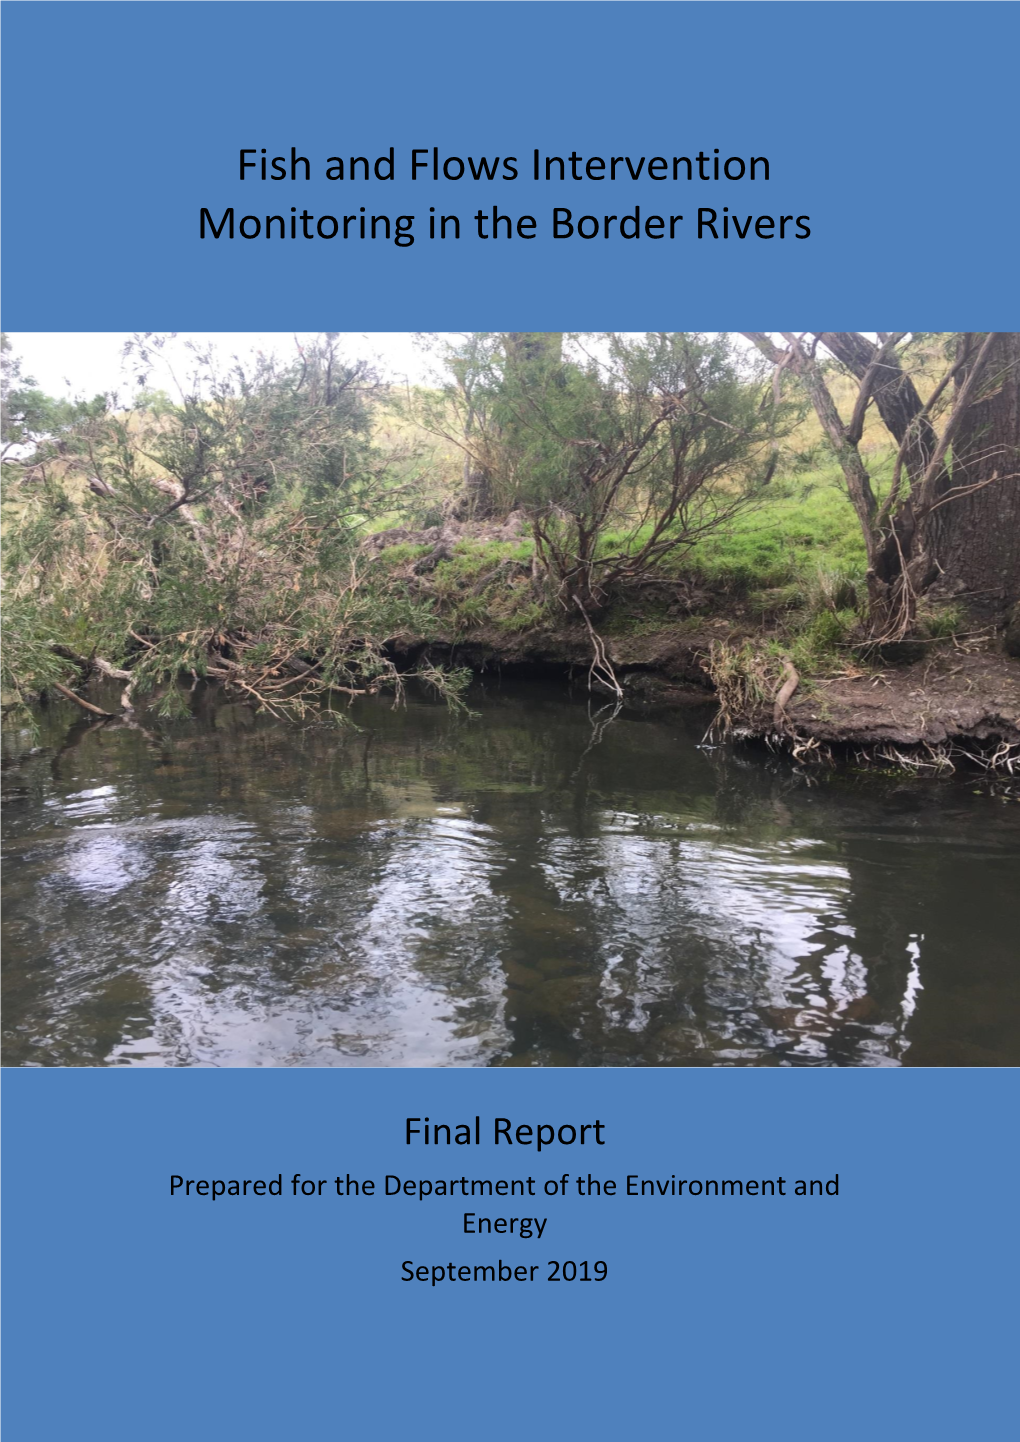 Fish and Flows Intervention Monitoring in the Border Rivers